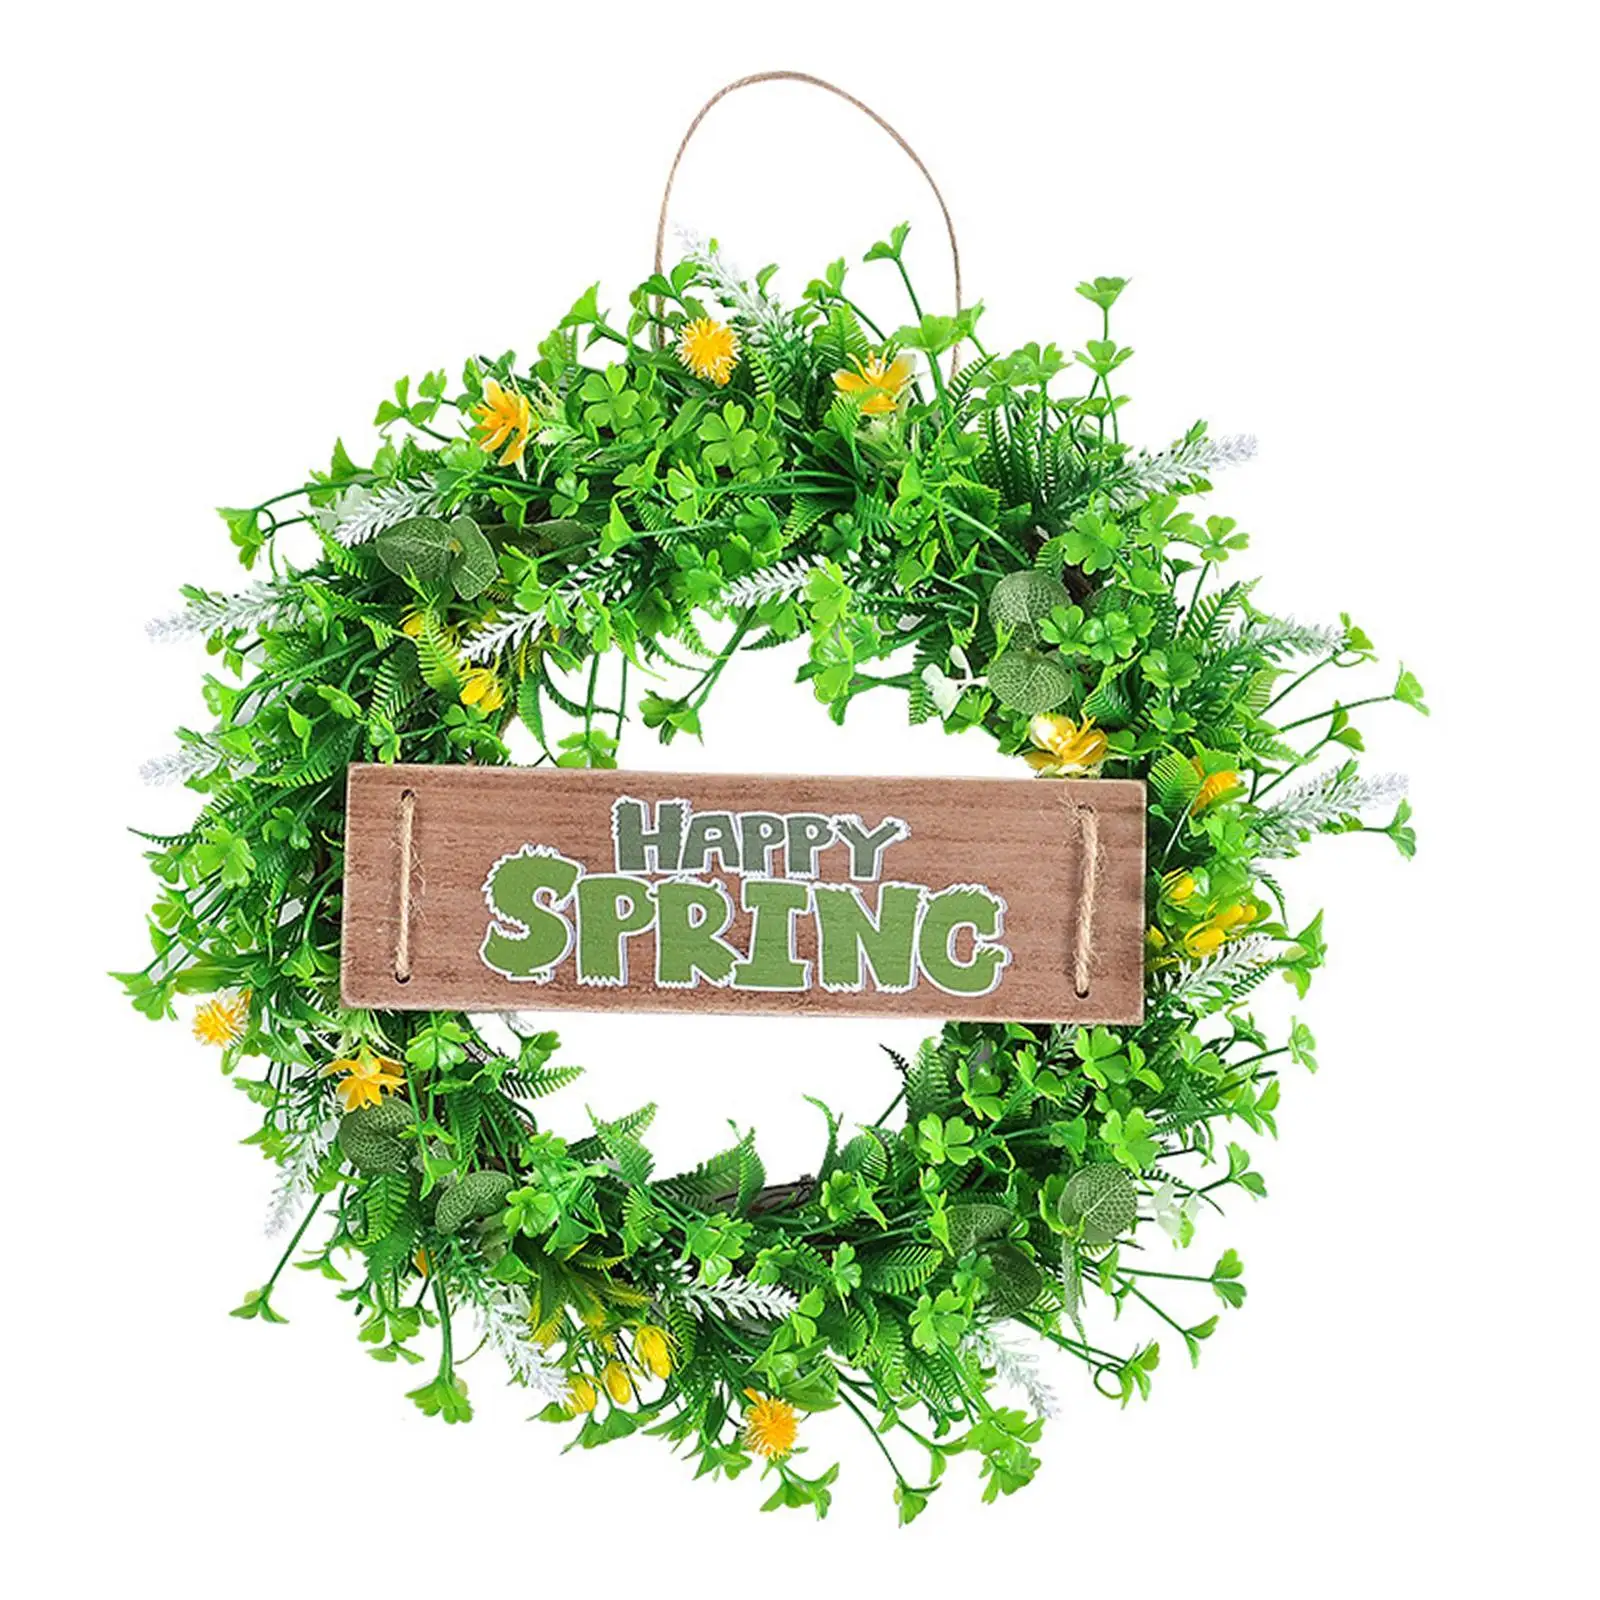 Easter Happy Spring Greenery Wreath Pastoral Front Door Hanger Decor Decorative Creative Summer Garland for Anniversary Holidays